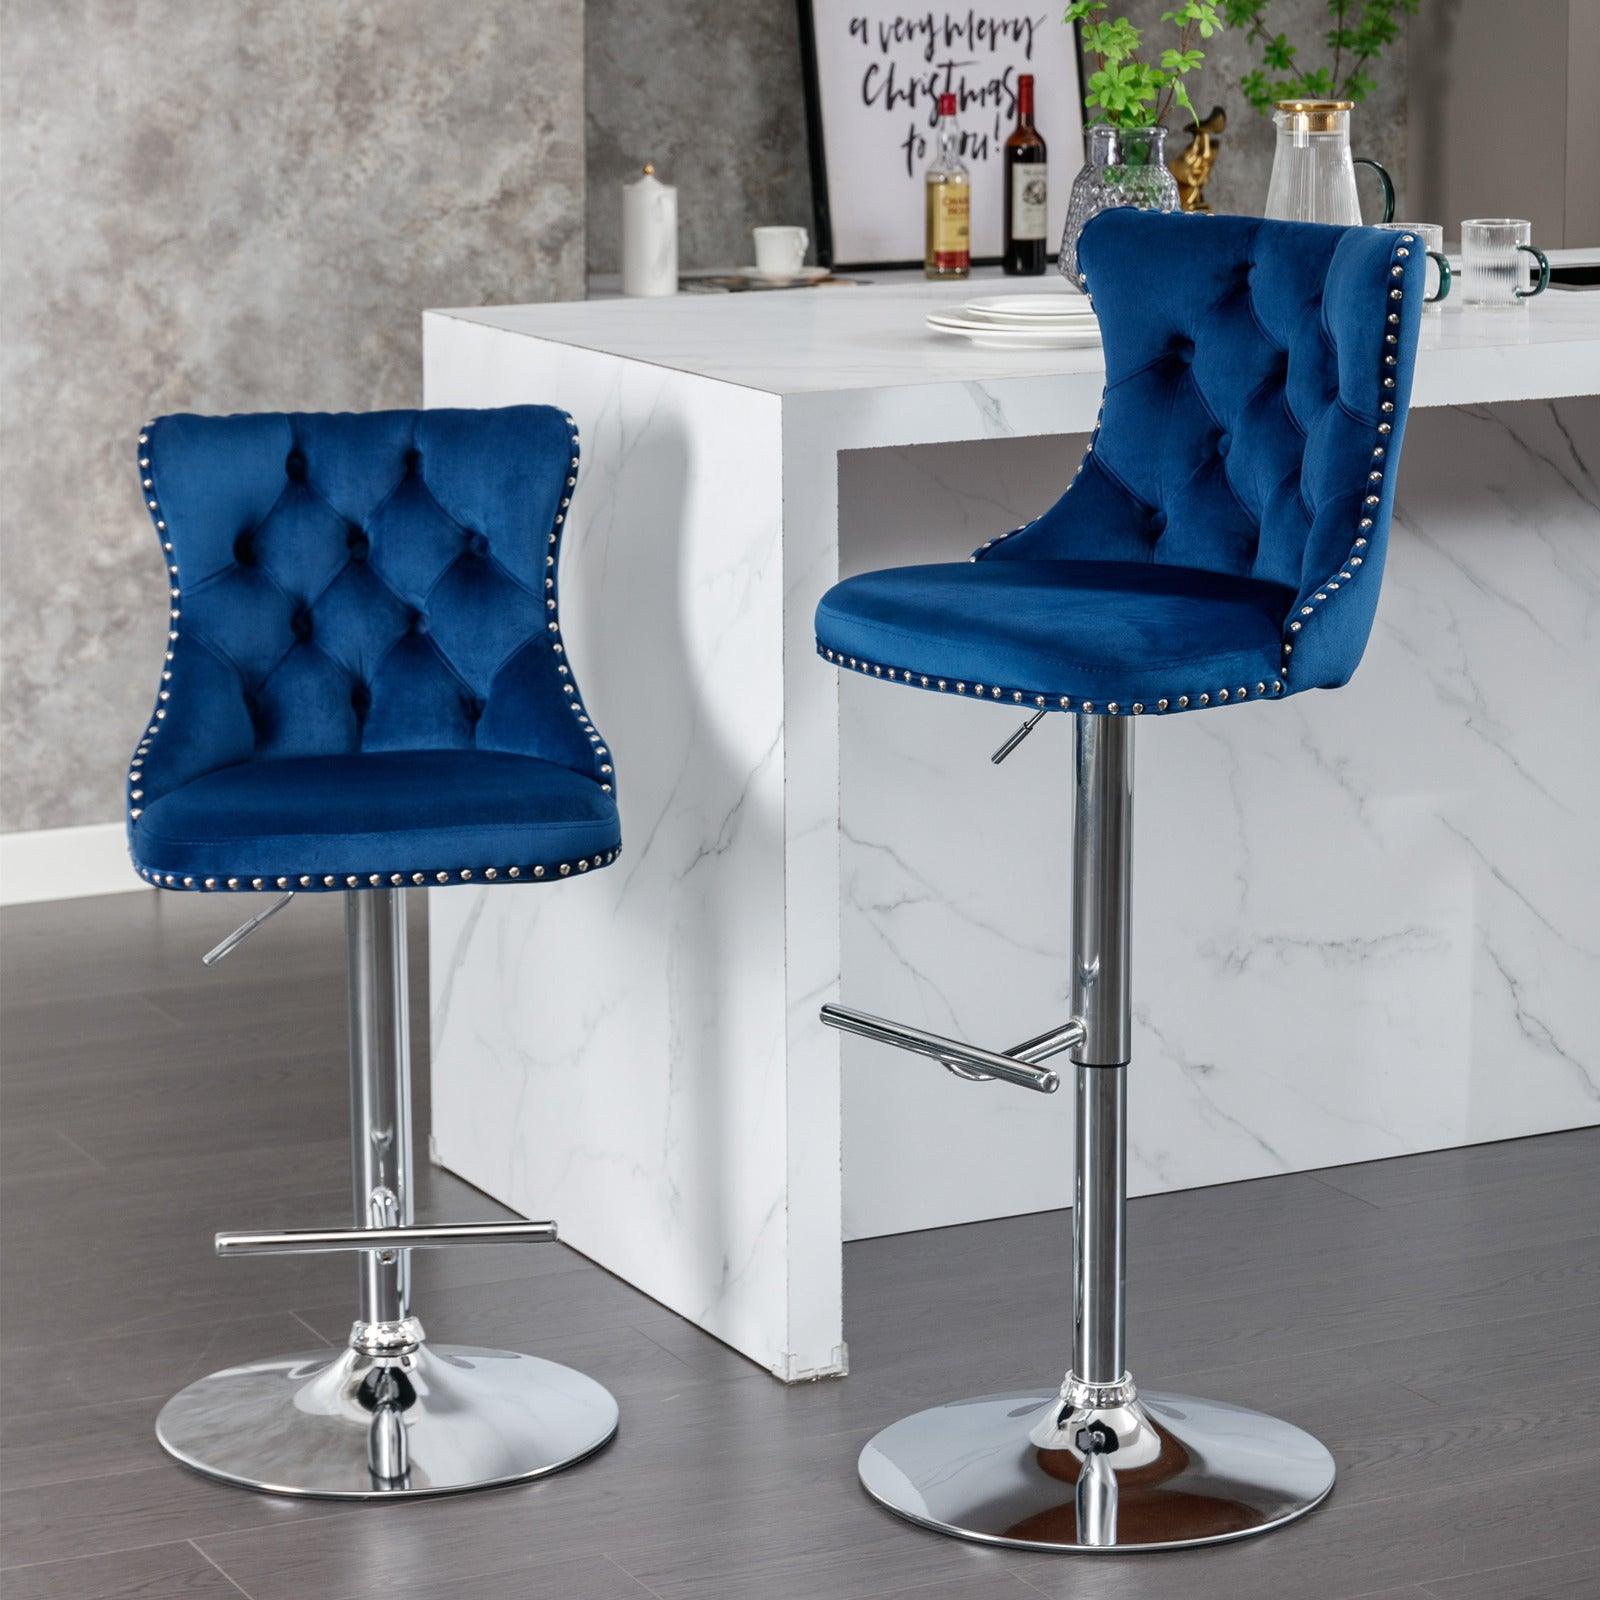 🆓🚛 Swivel Velvet Barstools Adjusatble Seat Height From 25-33 Inch, Modern Upholstered Chrome Base Bar Stools With Backs Comfortable Tufted for Home Pub & Kitchen Island（Blue, Set Of 2）